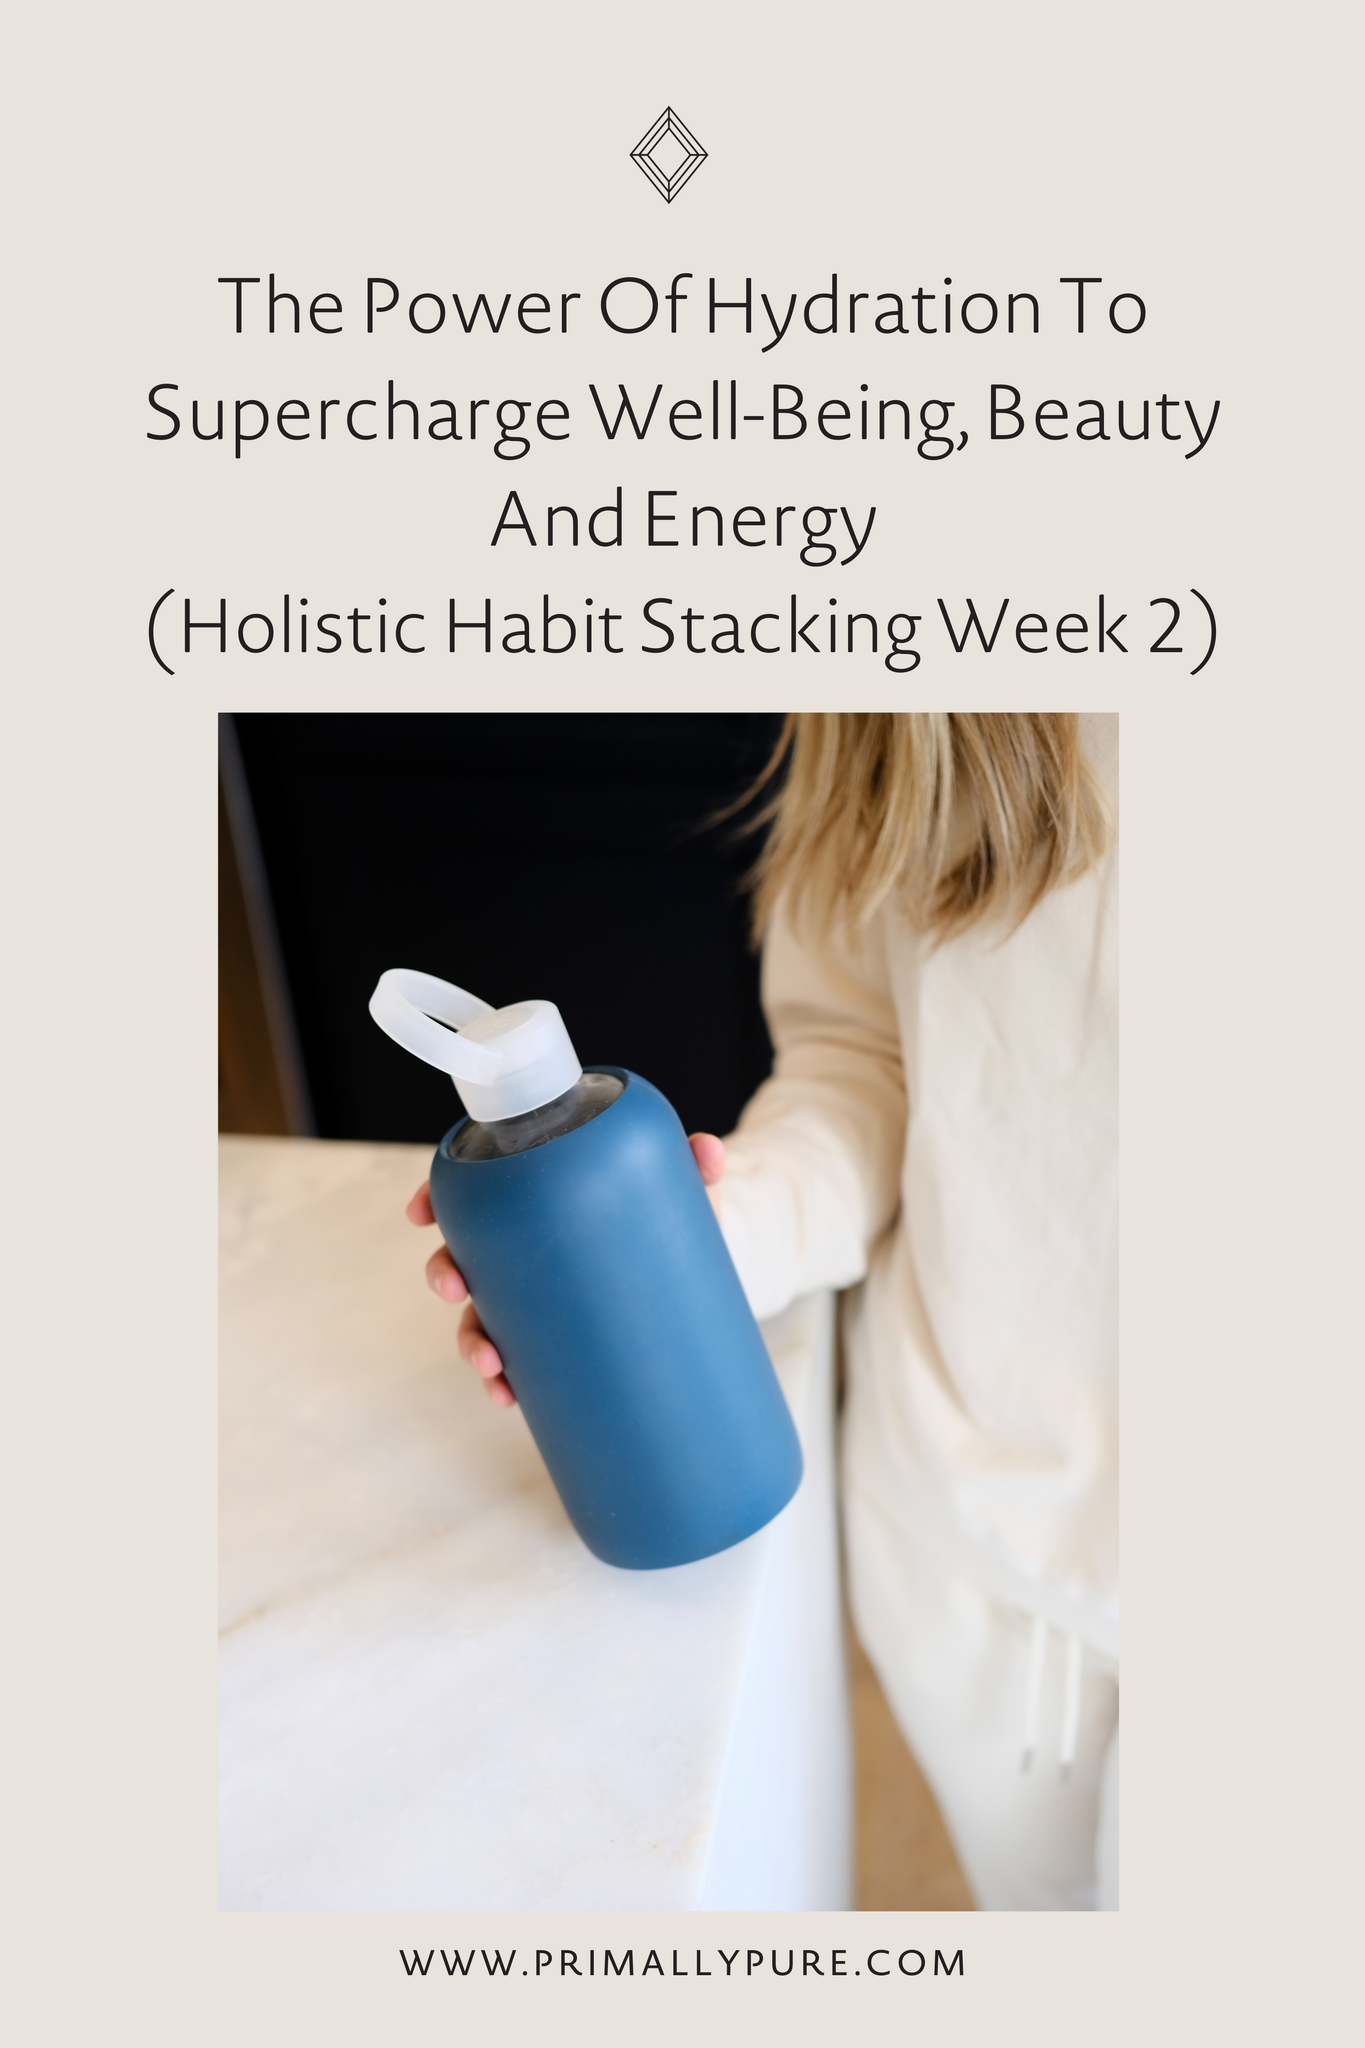 The Power Of Hydration To Supercharge Well-Being, Beauty And Energy (Holistic Habit Stacking Week 2) | Primally Pure Skincare